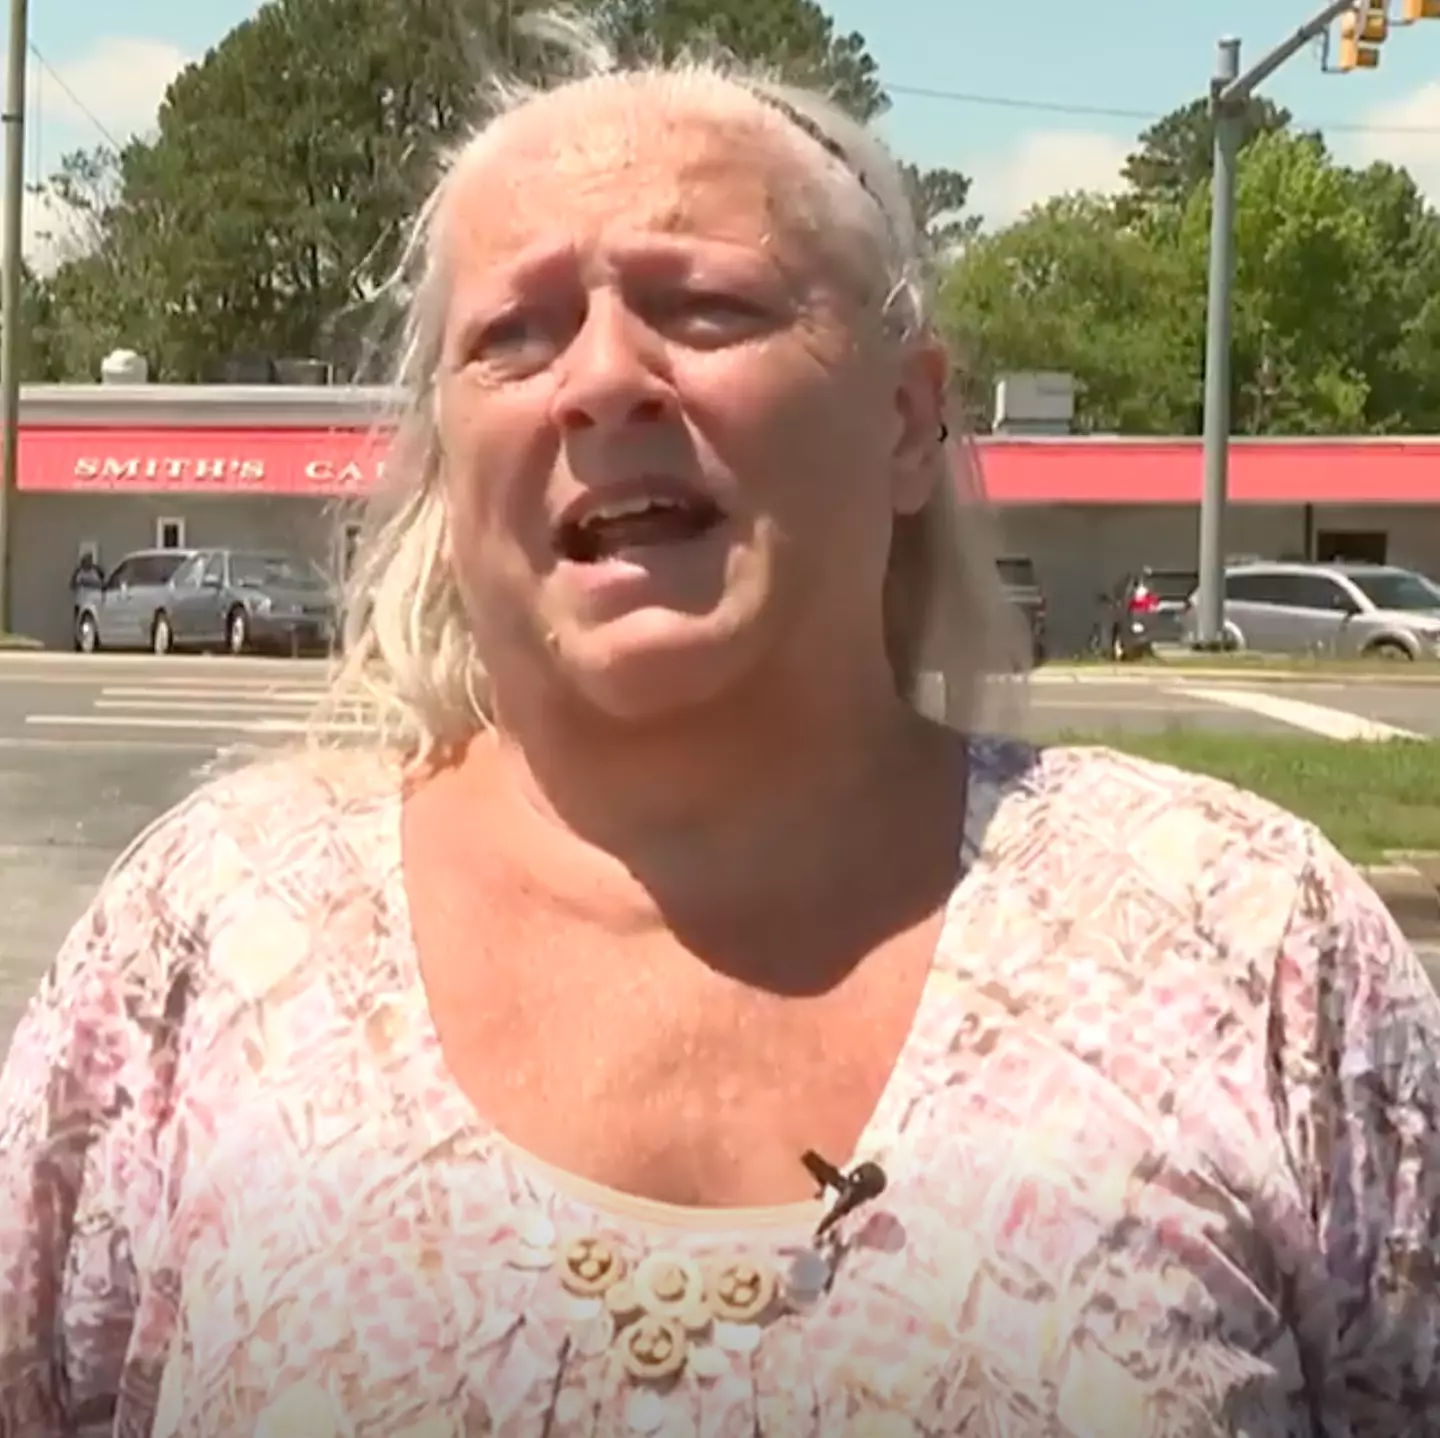 Rhonda left her card in a cafe where disaster struck. (YouTube/ WRAL)